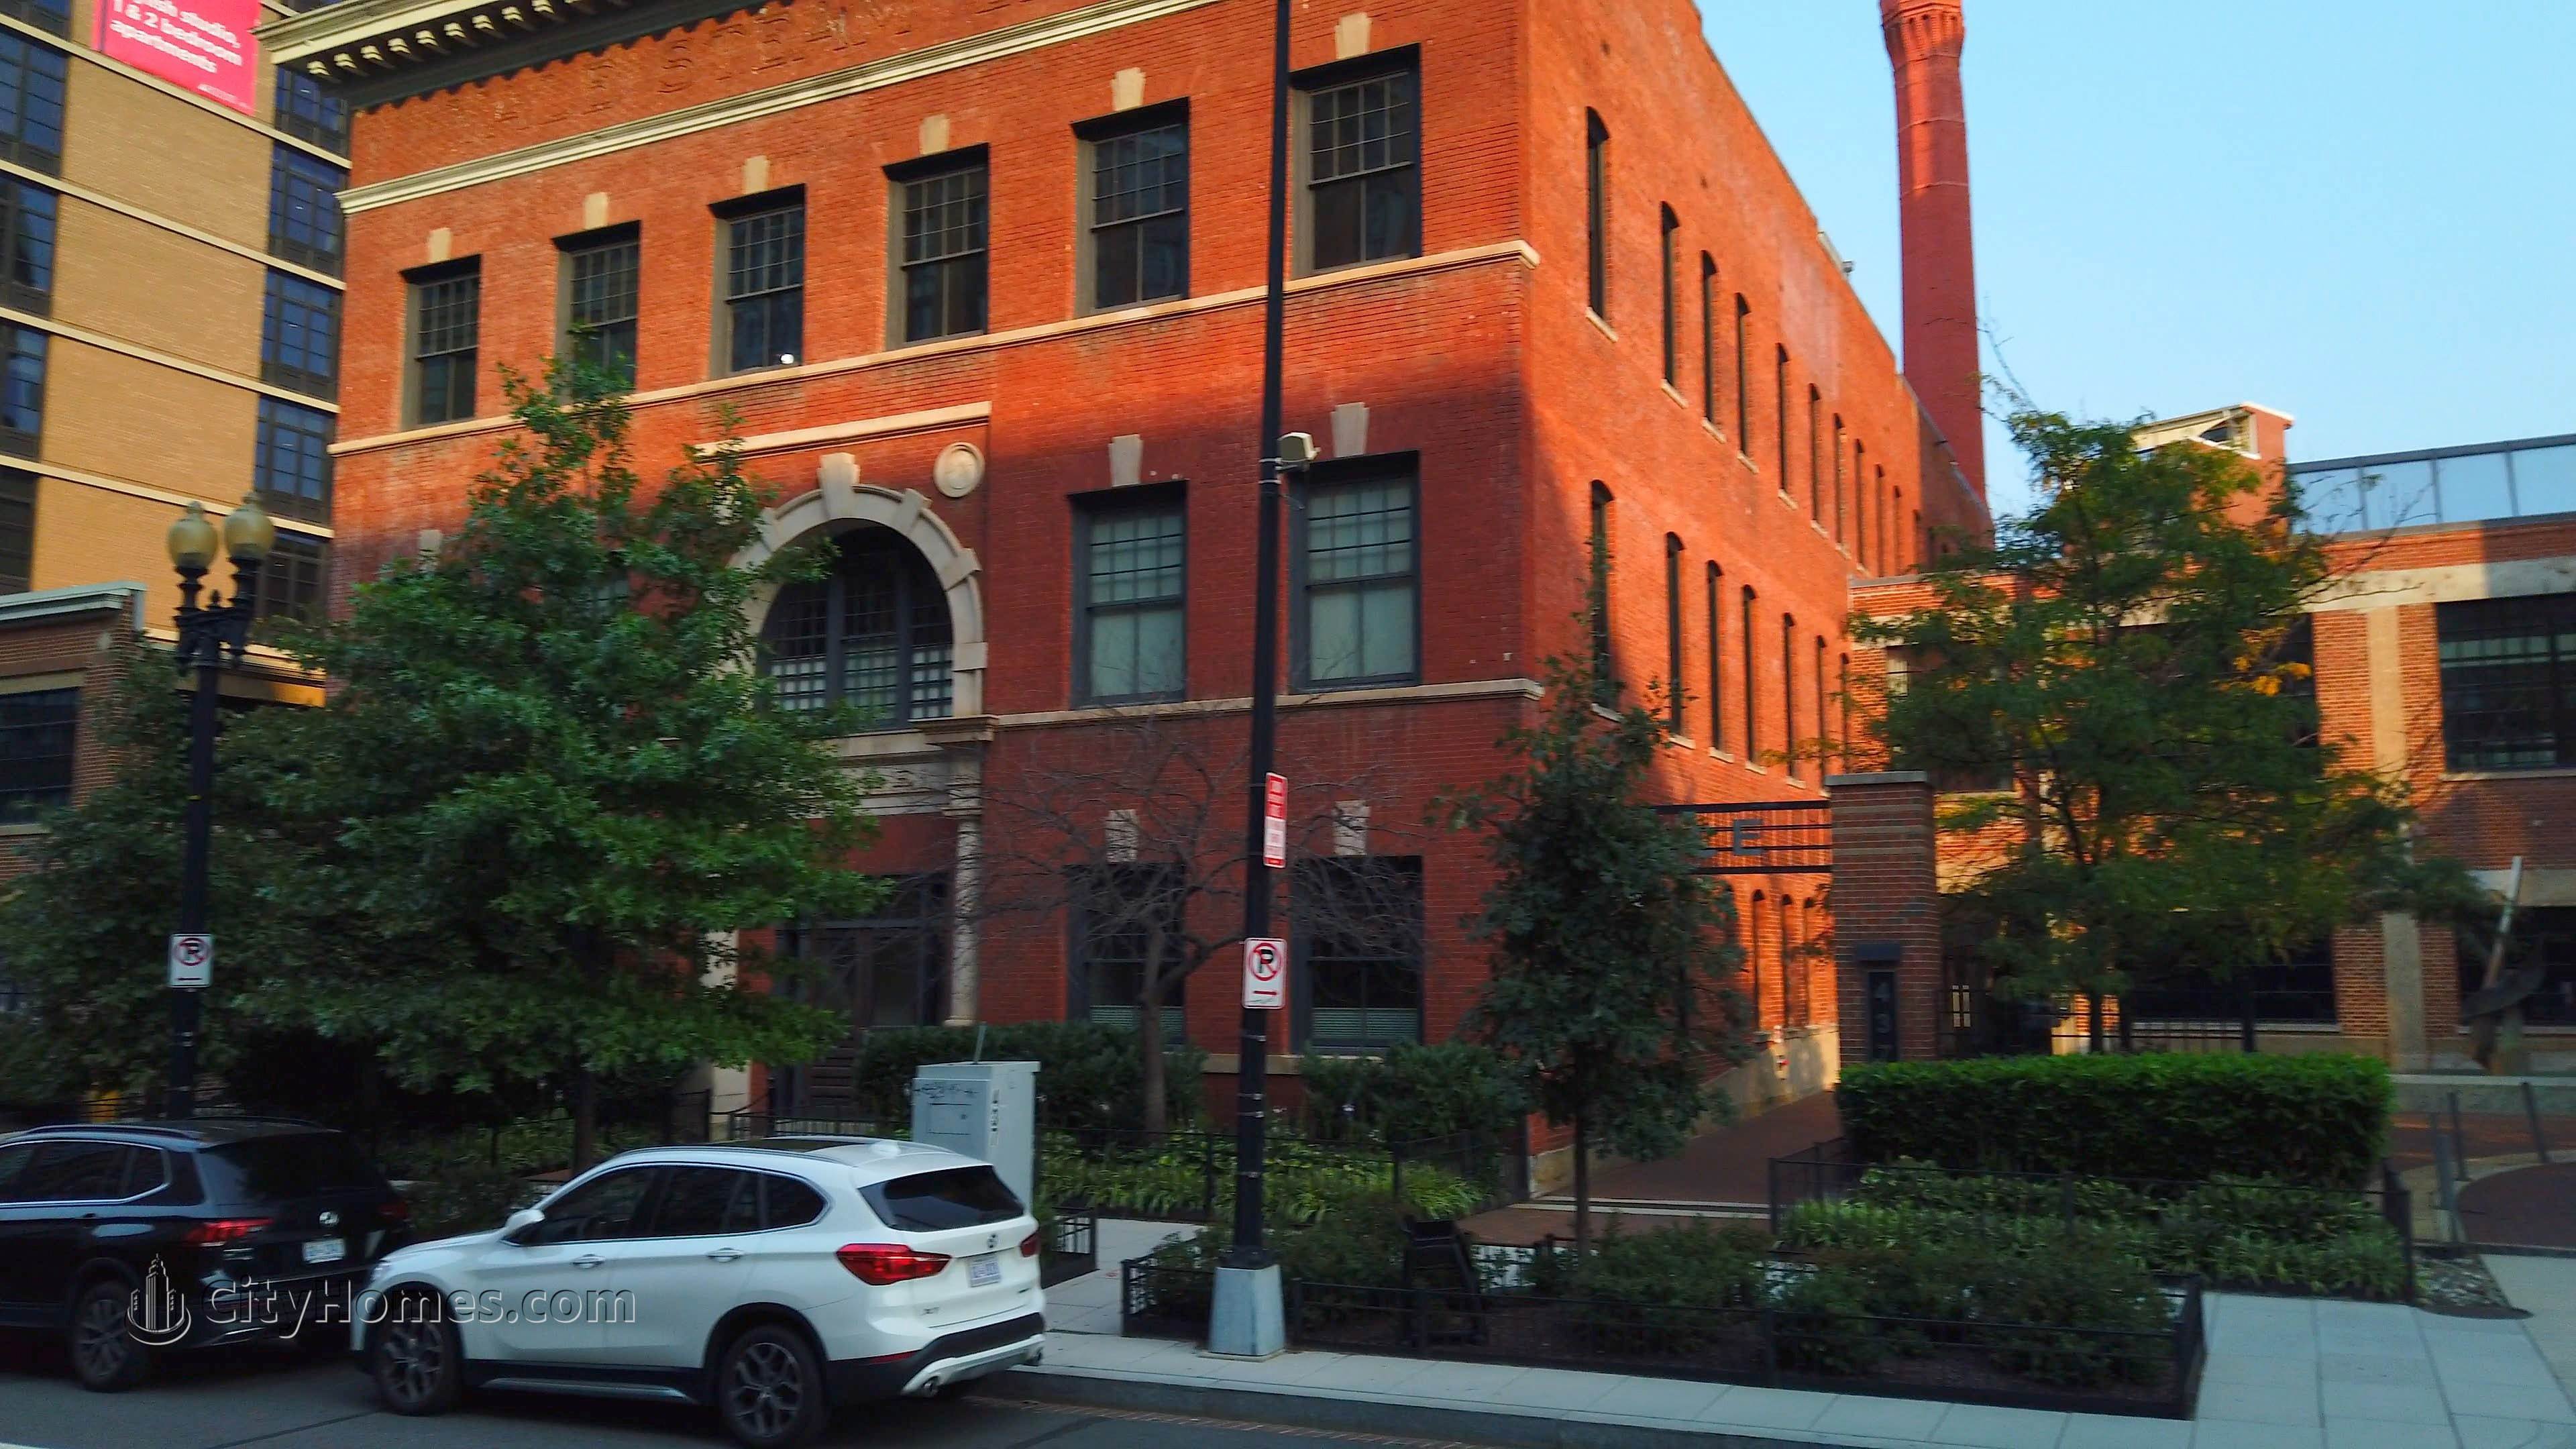 2. Yale Steam Laundry building at 437 New York Ave NW, Mount Vernon Square, Washington, DC 20001